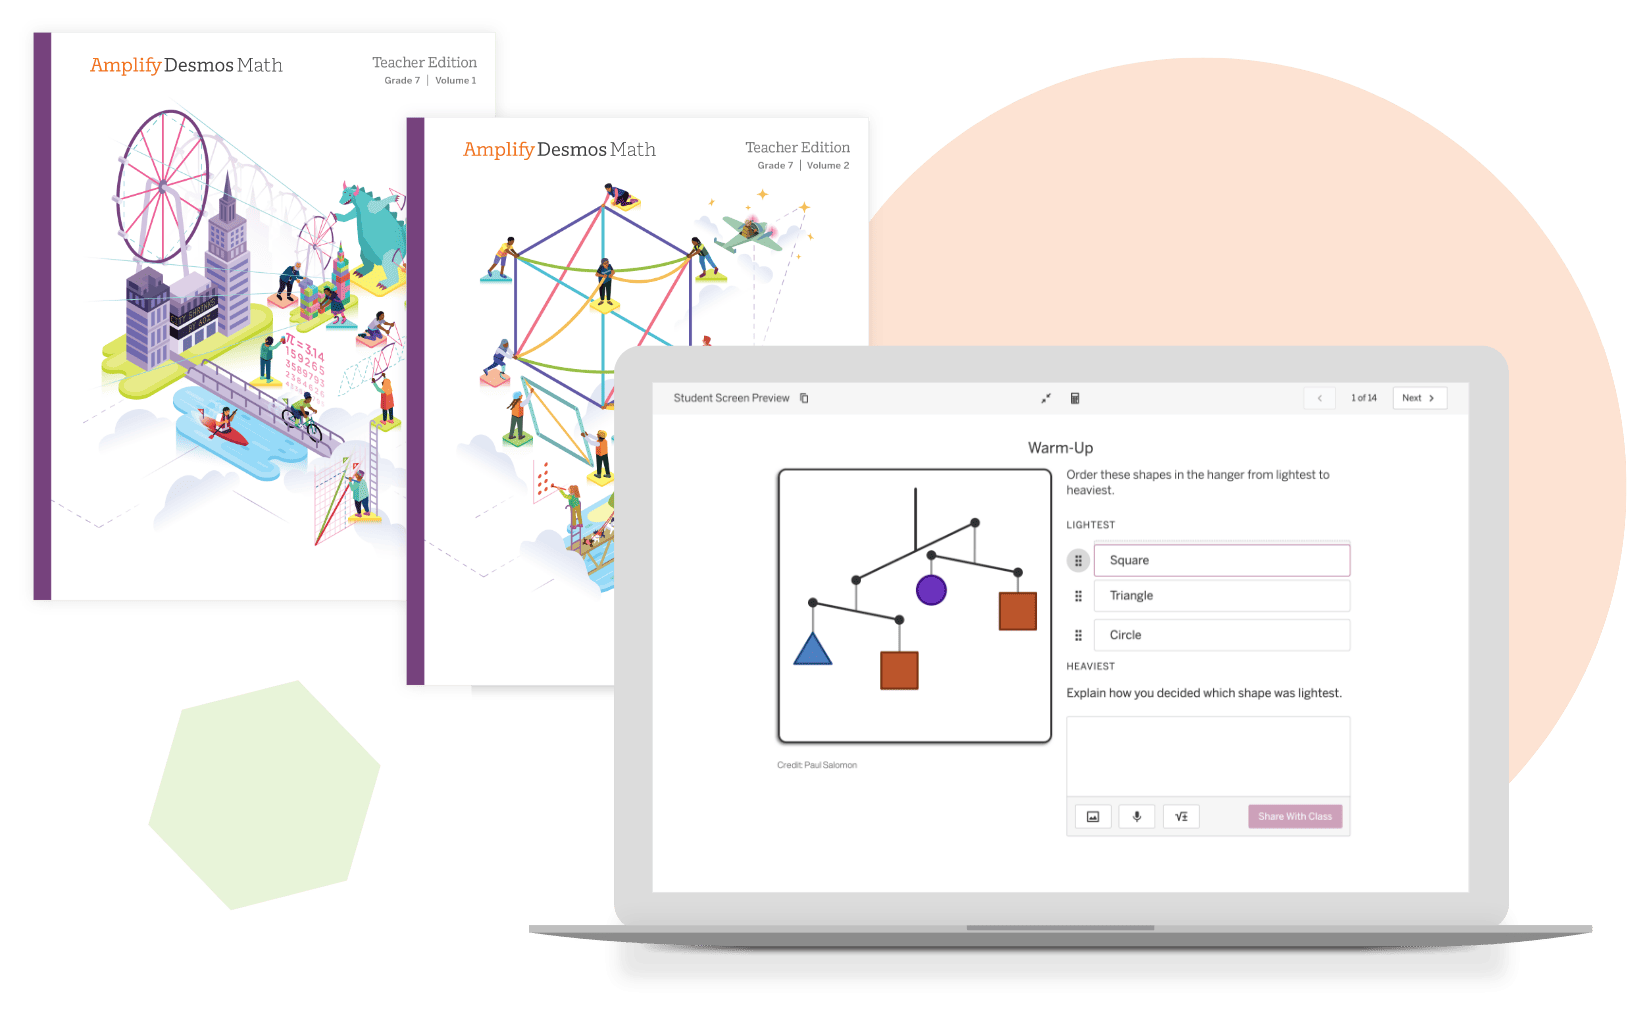 An illustration of various educational settings; on the left is a colorful, simplified cityscape with educational icons, and on the right, a laptop displaying an ſֱ Desmos math lesson interface.